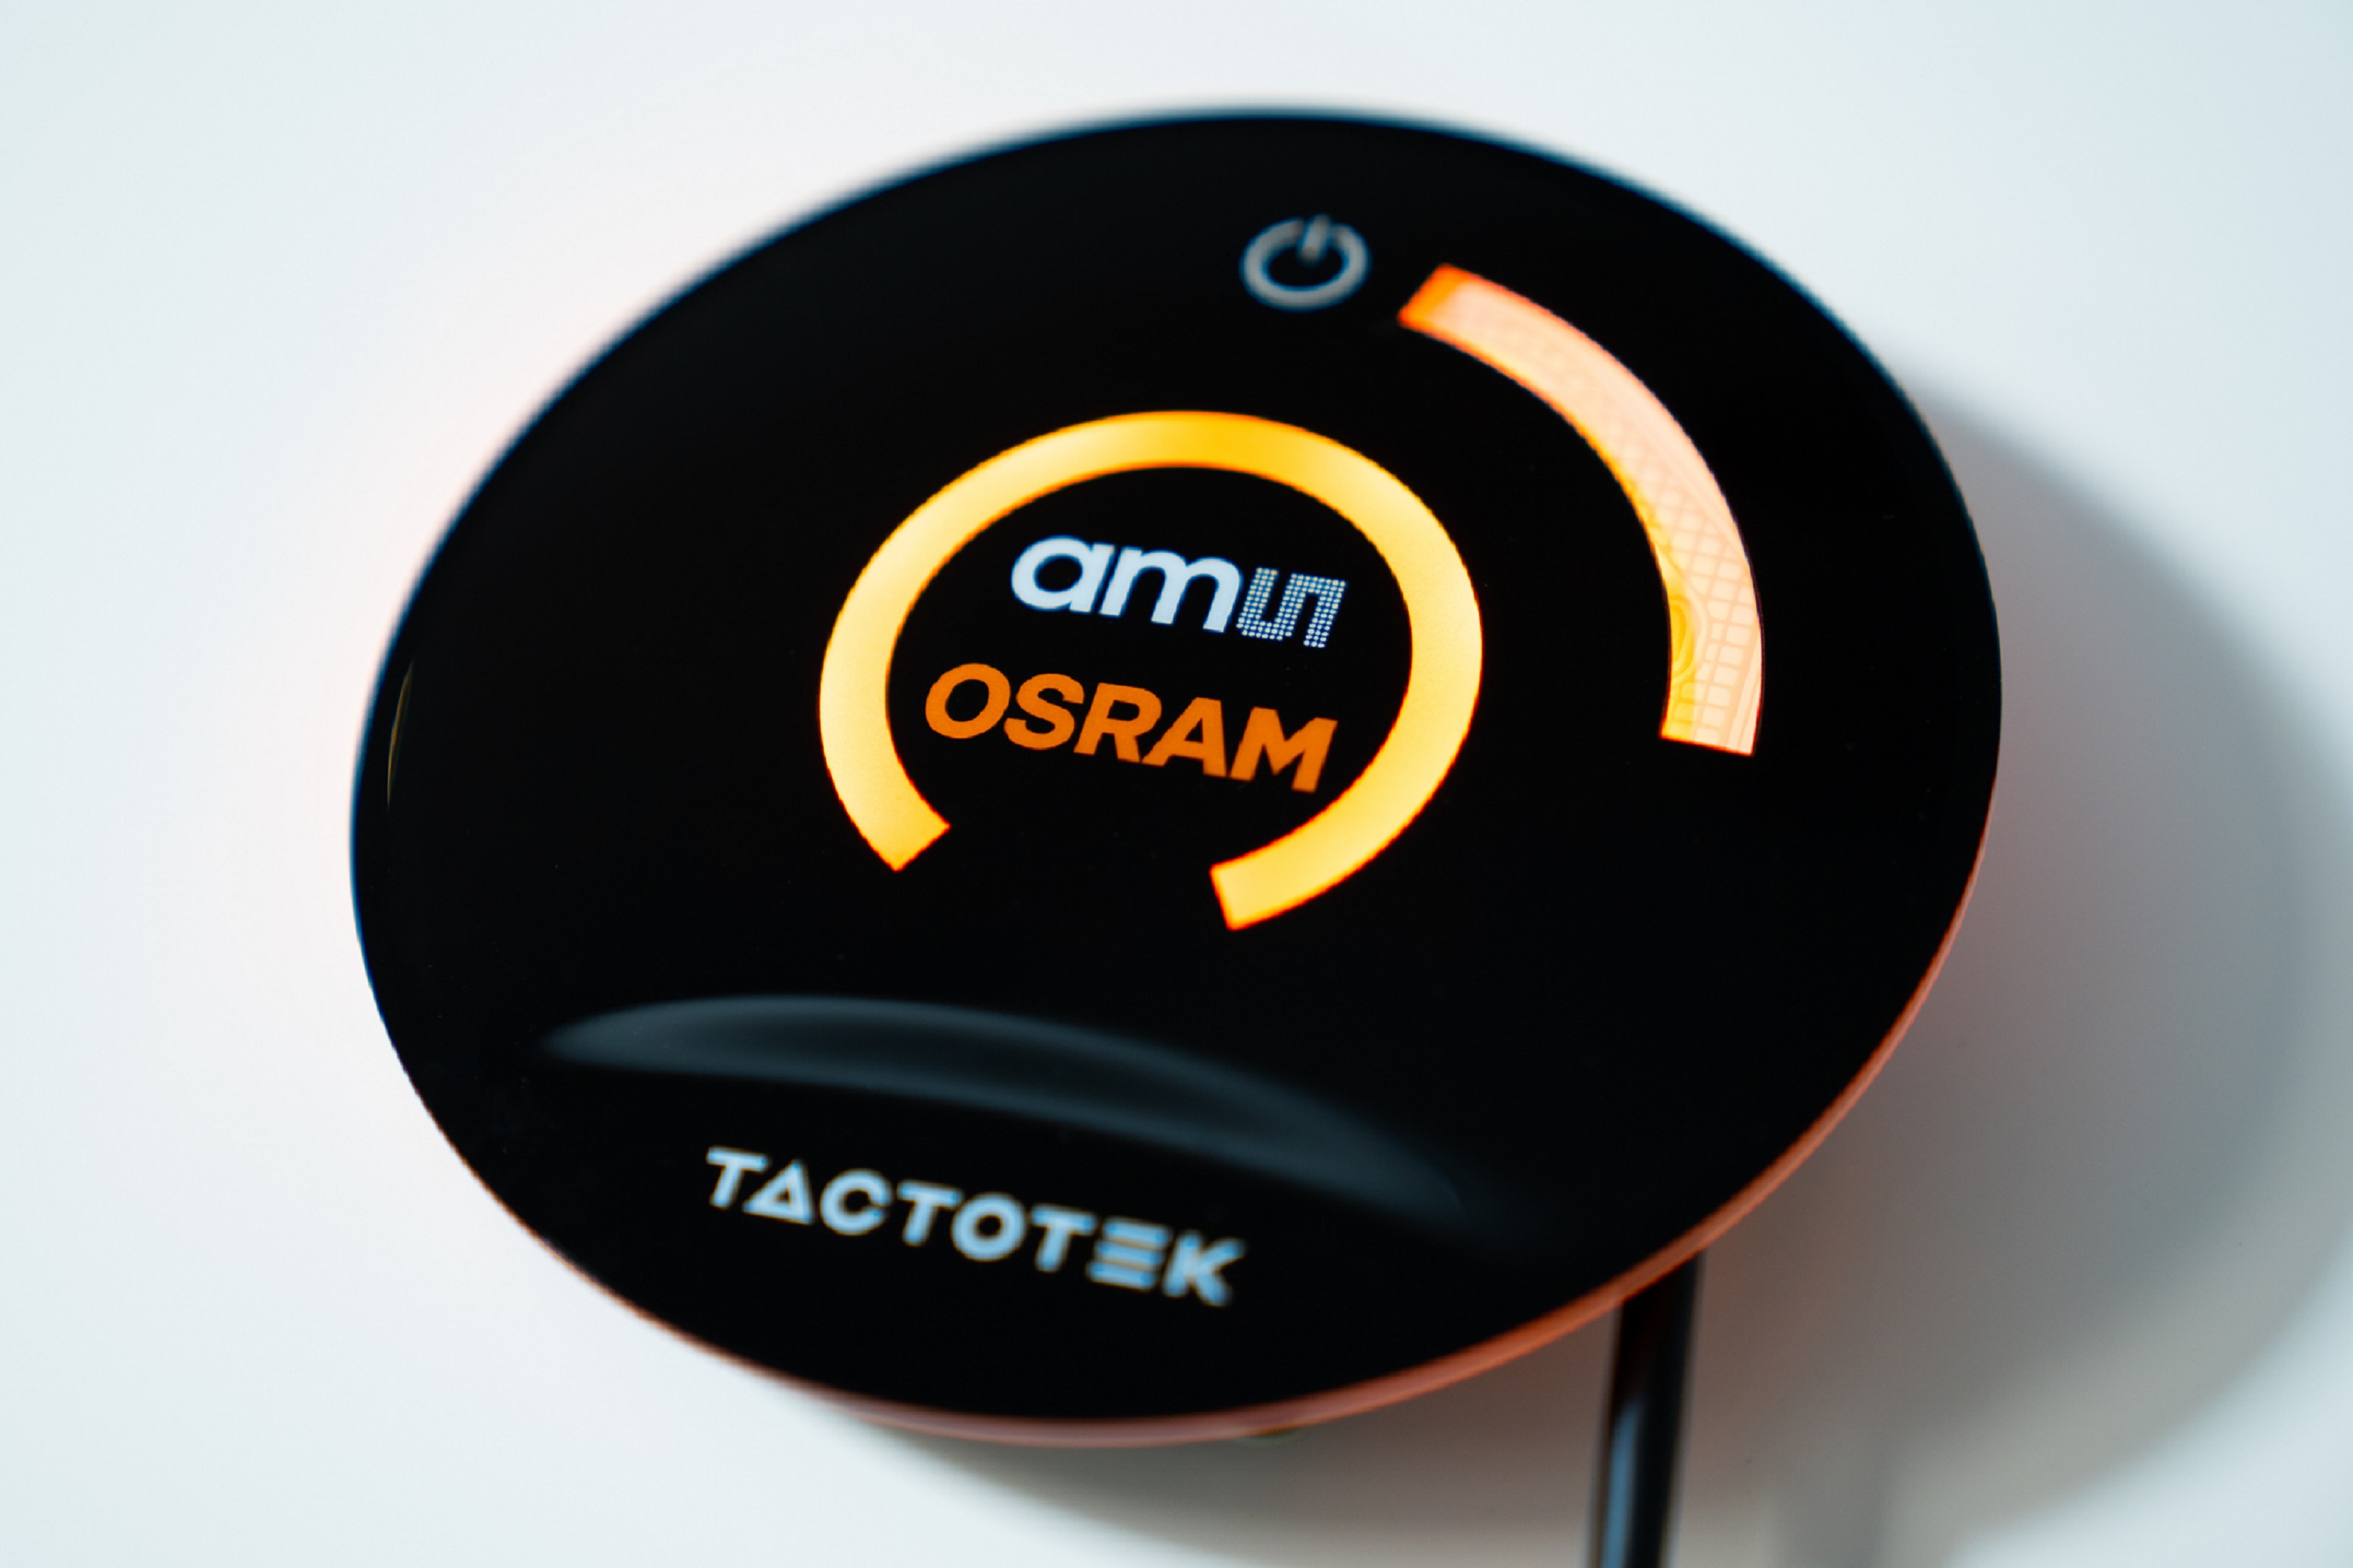 TactoTek and ams OSRAM cooperate to optimize RGB LED for in-mold structural electronics to drive innovations in car illumination